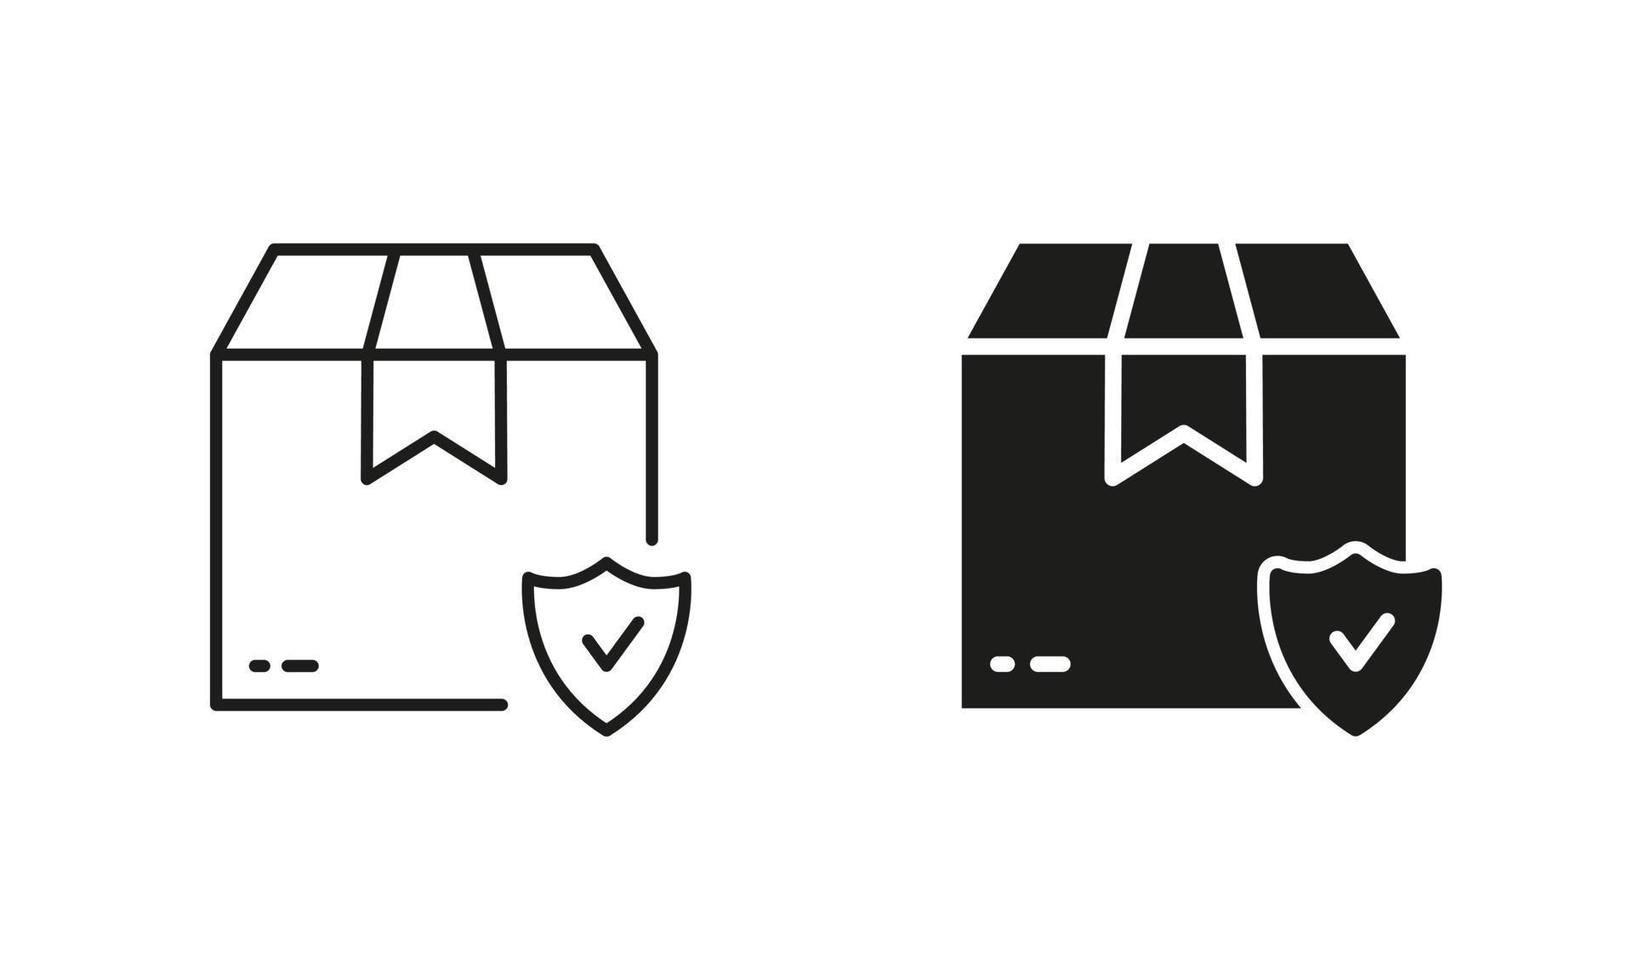 Safe Delivery Shield Silhouette and Line Icon Set. Parcel Box Secure Transportation. Insurance Safety Shipping Package Symbol. Protection Deliver. Editable Stroke. Isolated Vector Illustration.